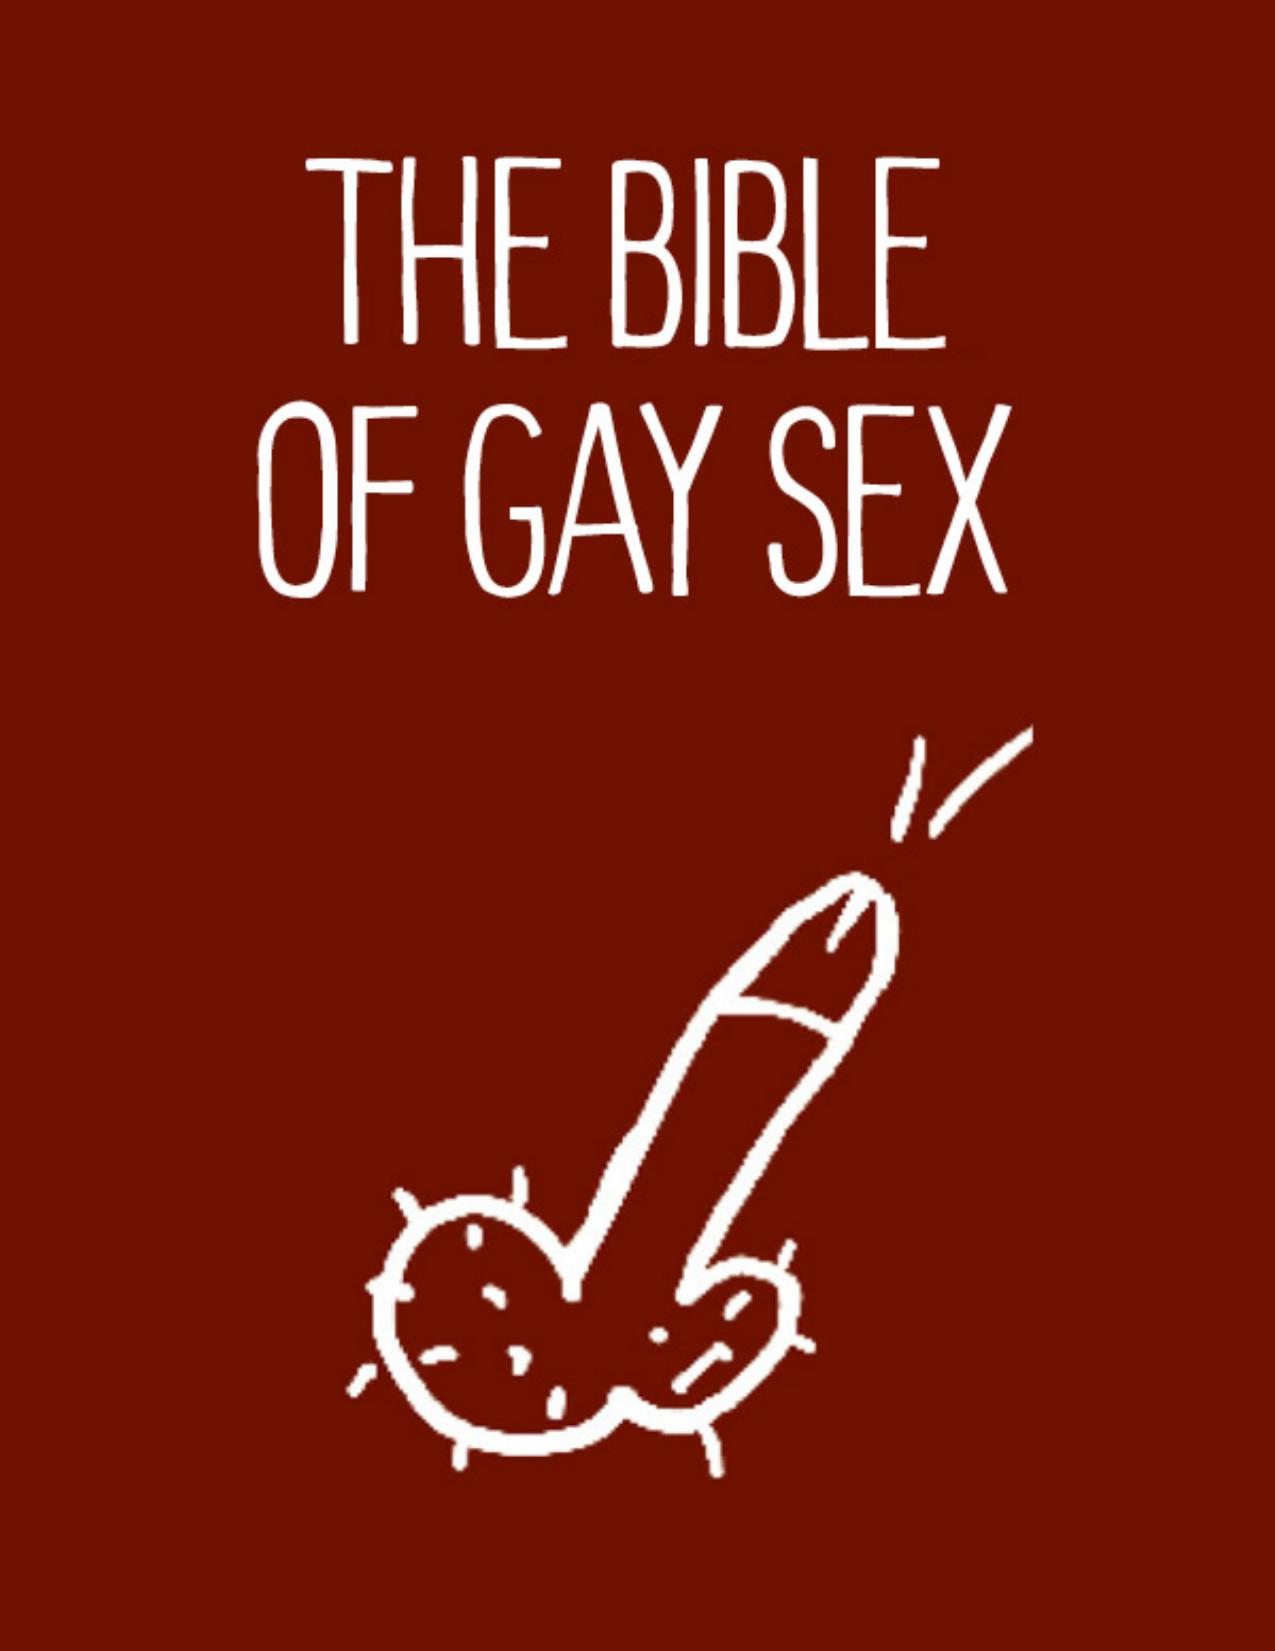 The Bible of Gay Sex by Stephan Niederwieser